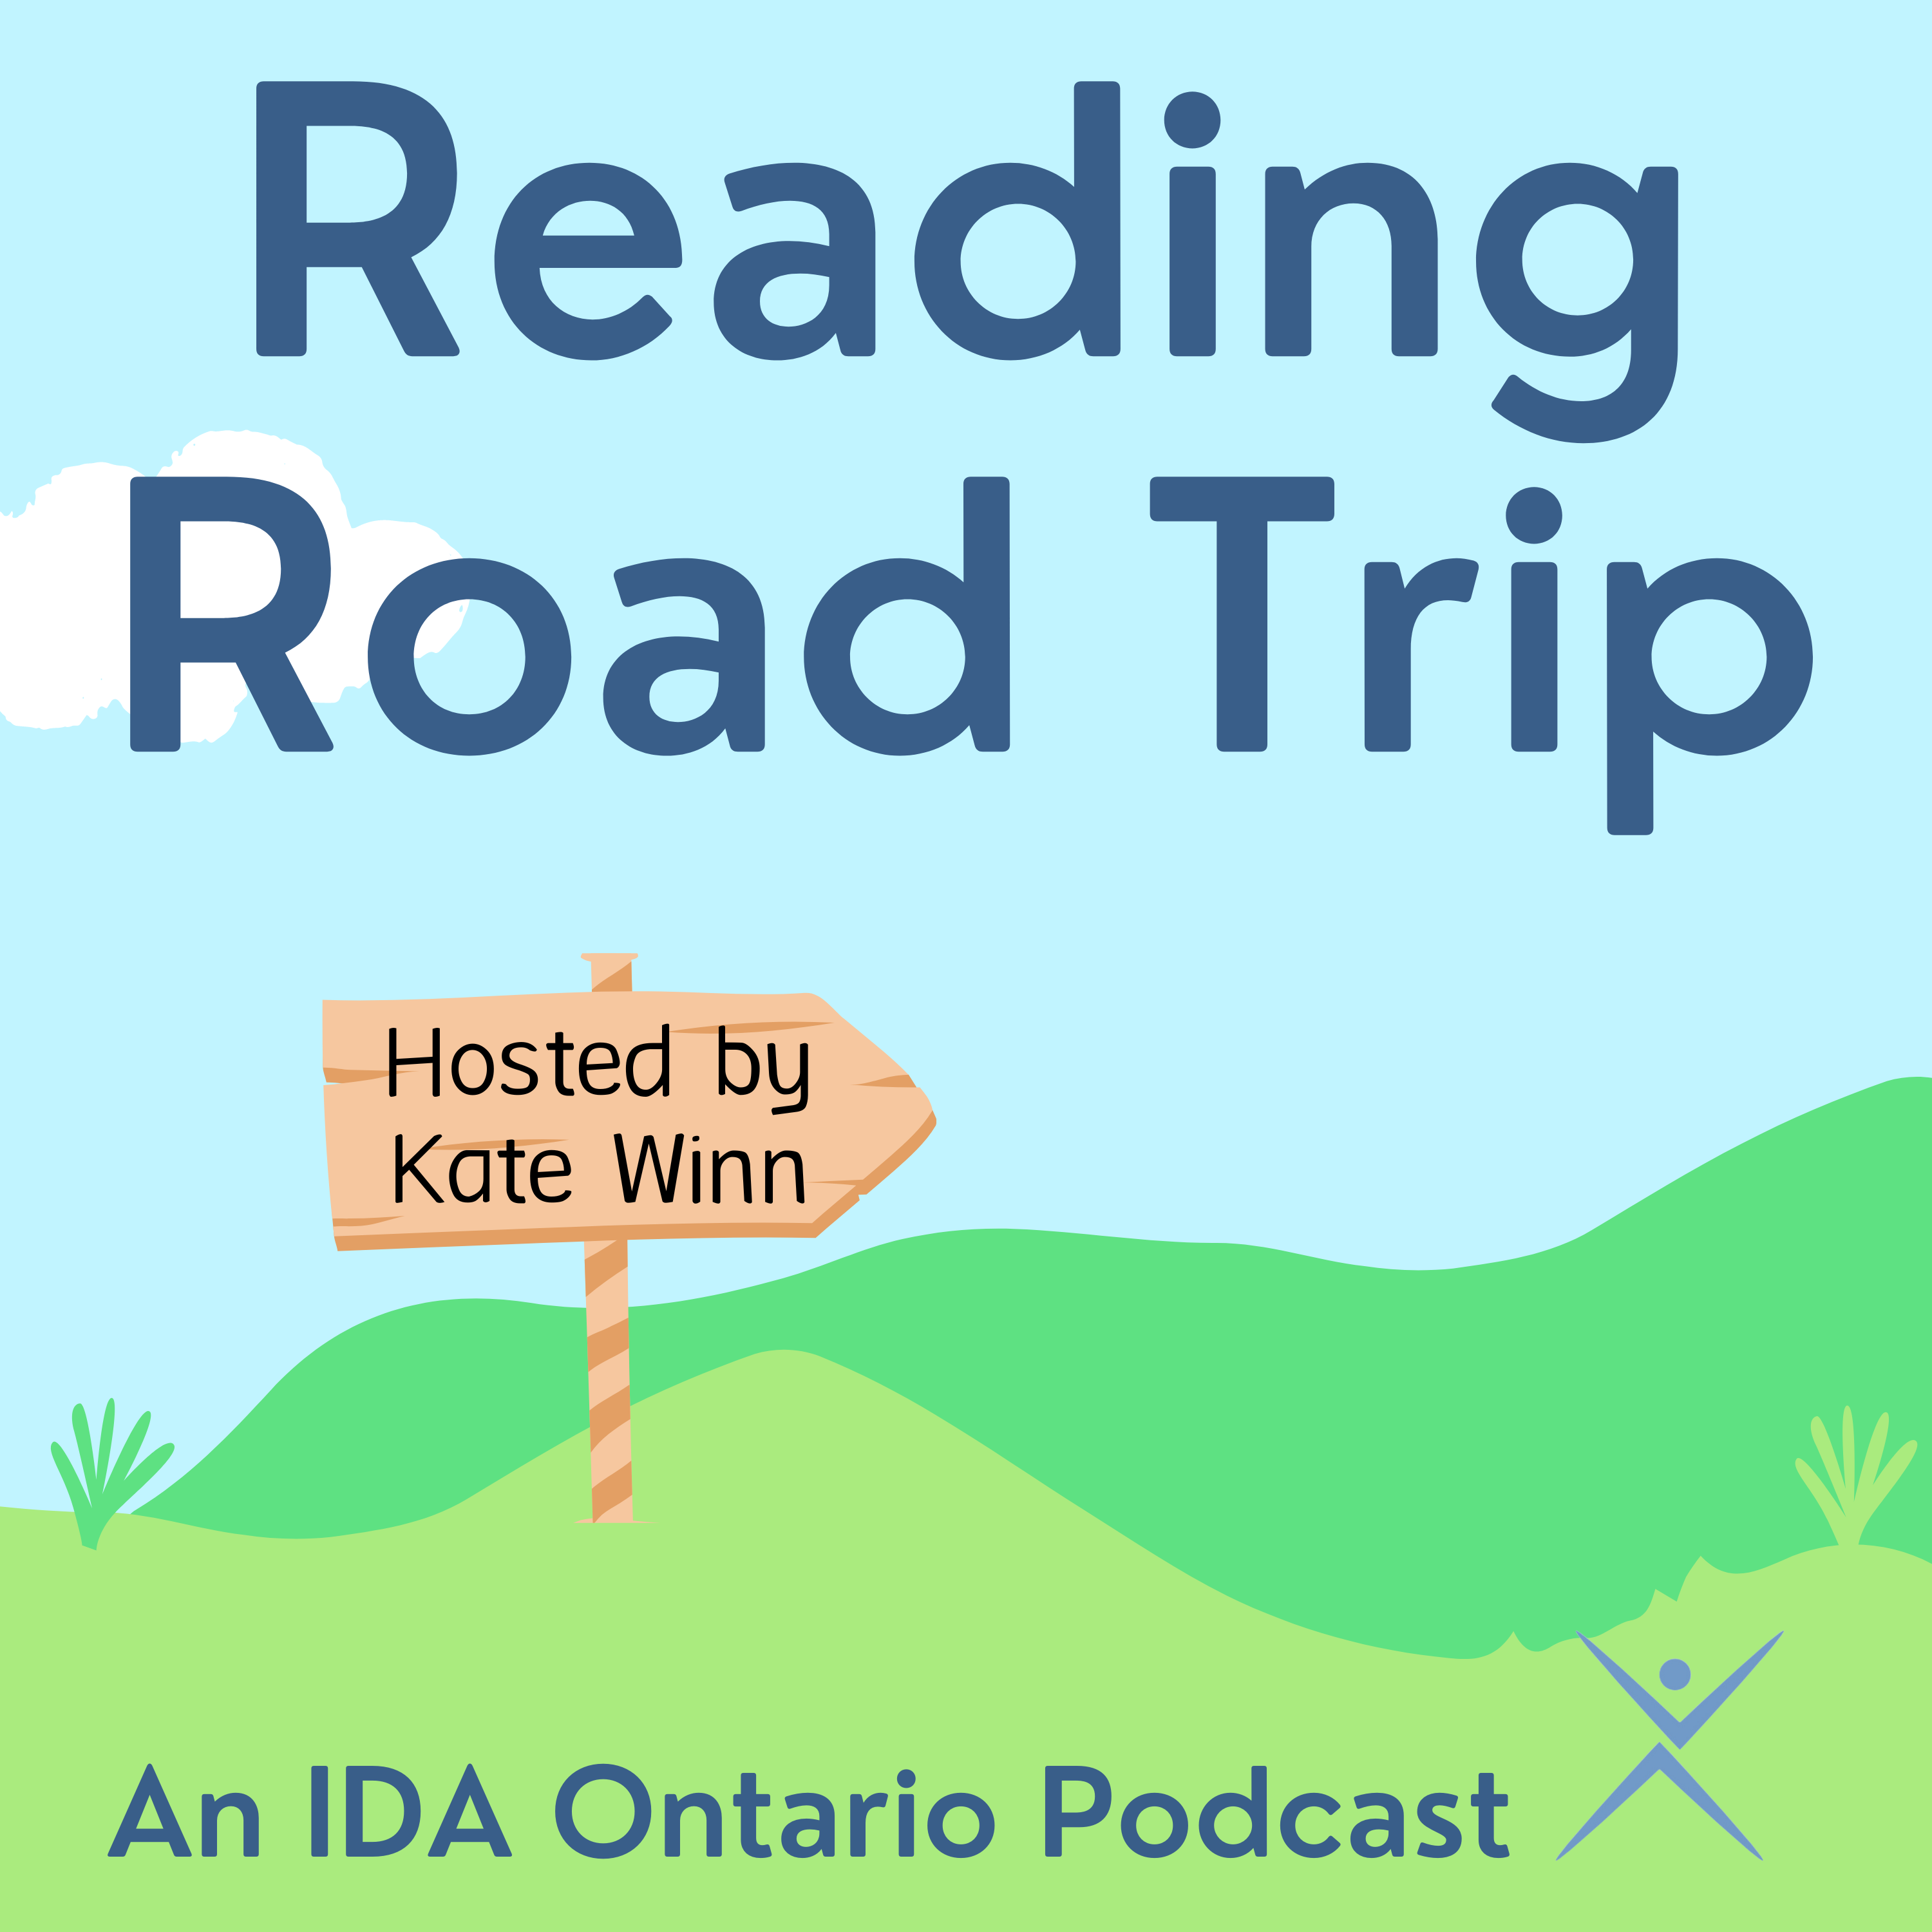 Reading Road Trip Premieres Monday, July 3rd!